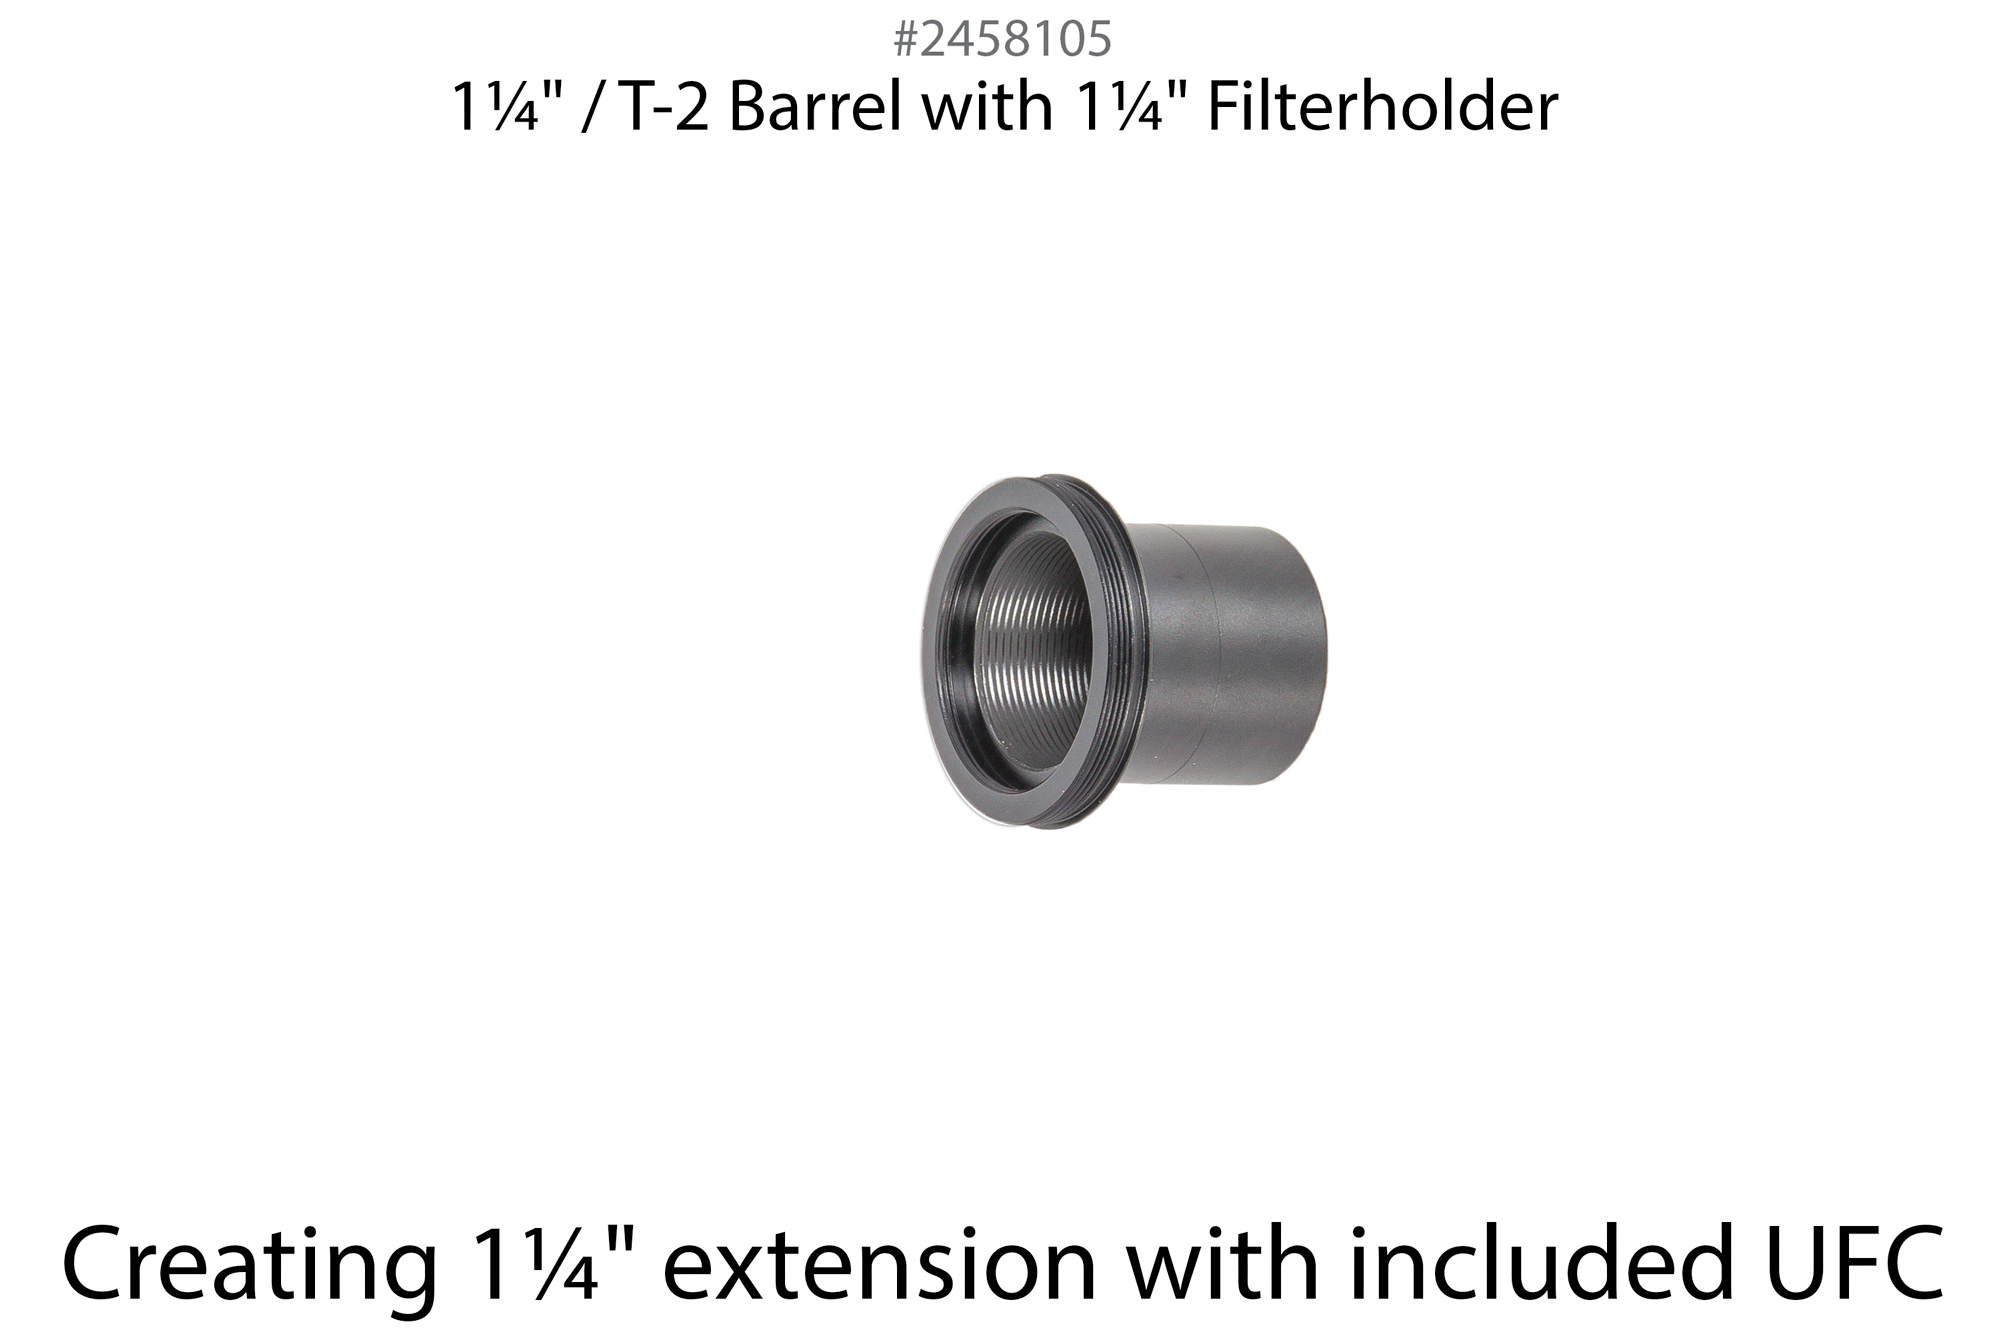 1¼" extension with barrel, clicklock and UFC System for fast filter changing